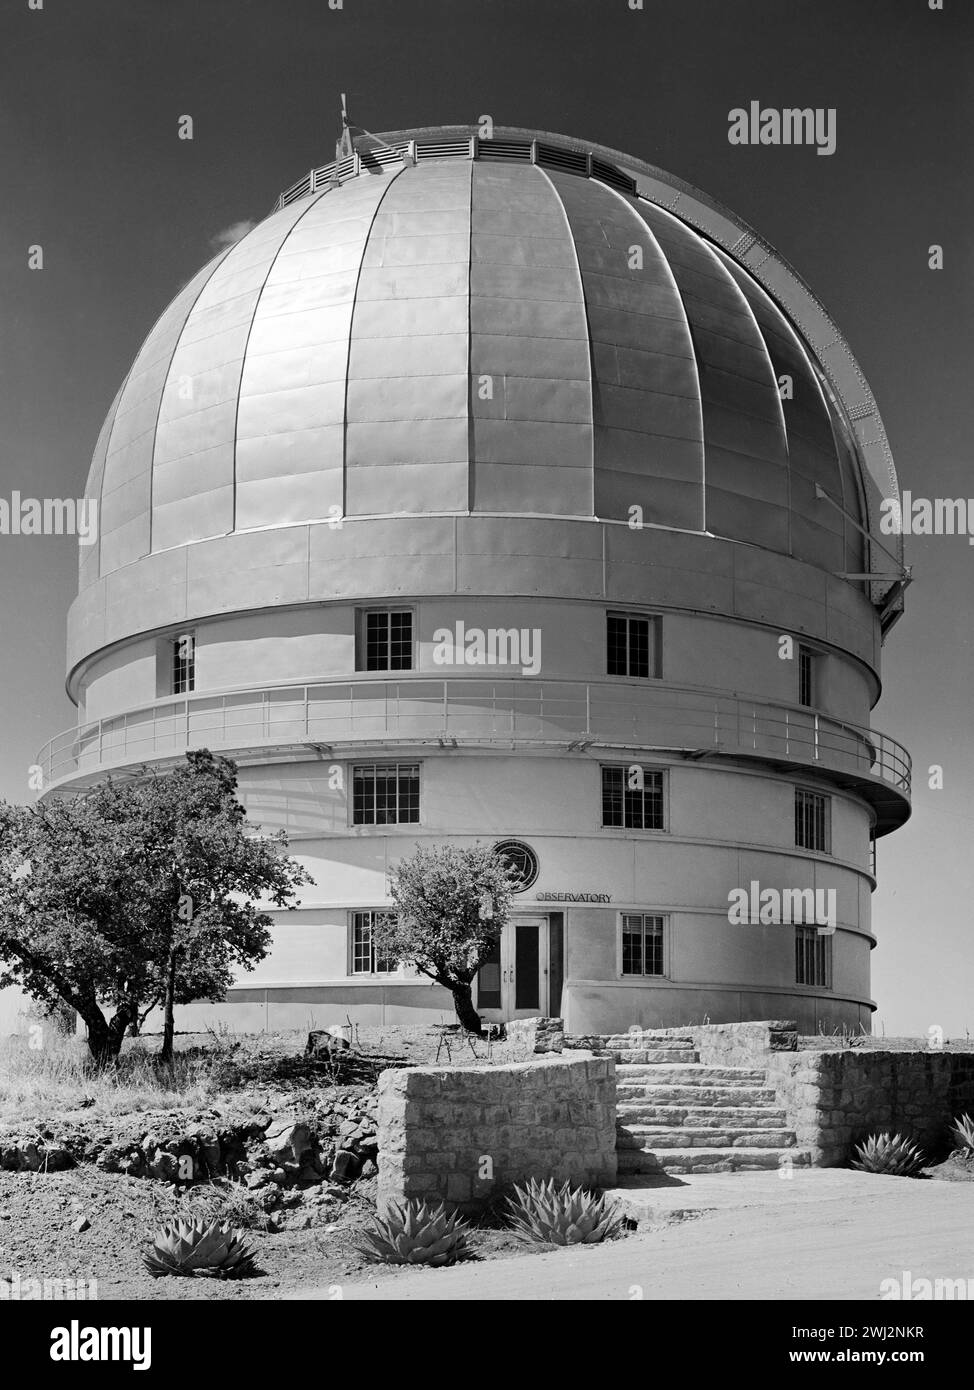 McDonald Observatory vicino a Fort Davis, Texas, USA, Russell Lee, U.S. Farm Security Administration, maggio 1939 Foto Stock